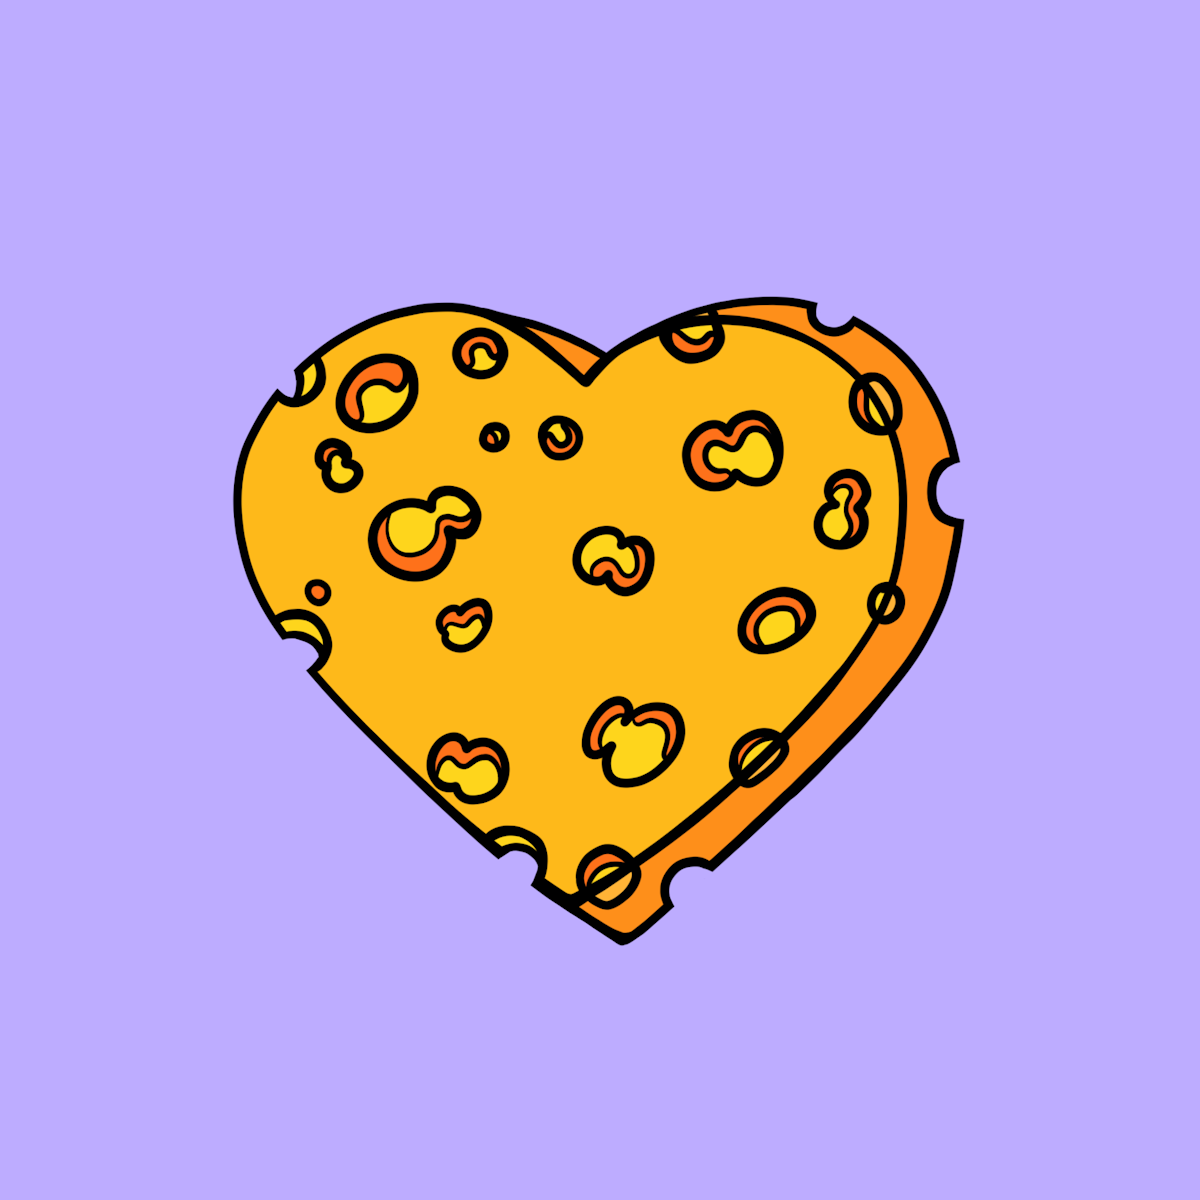 Illustration of a romantic, heart-shaped cheese.